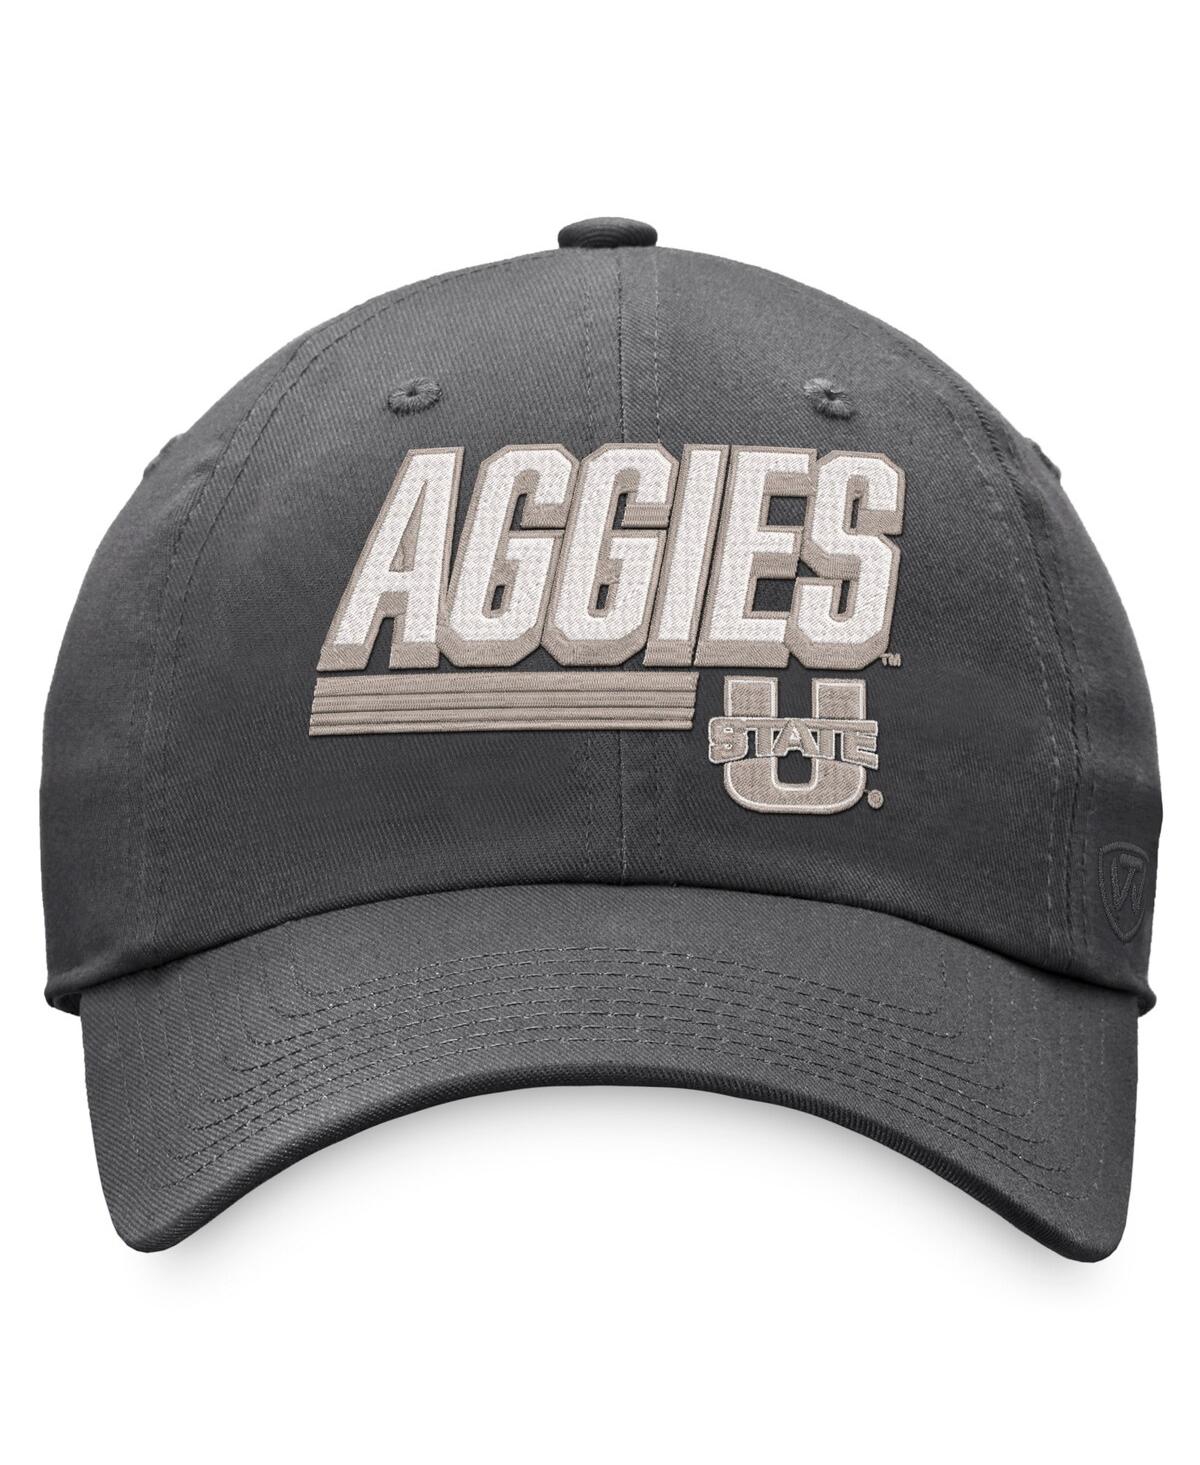 Shop Top Of The World Men's  Charcoal Utah State Aggies Slice Adjustable Hat